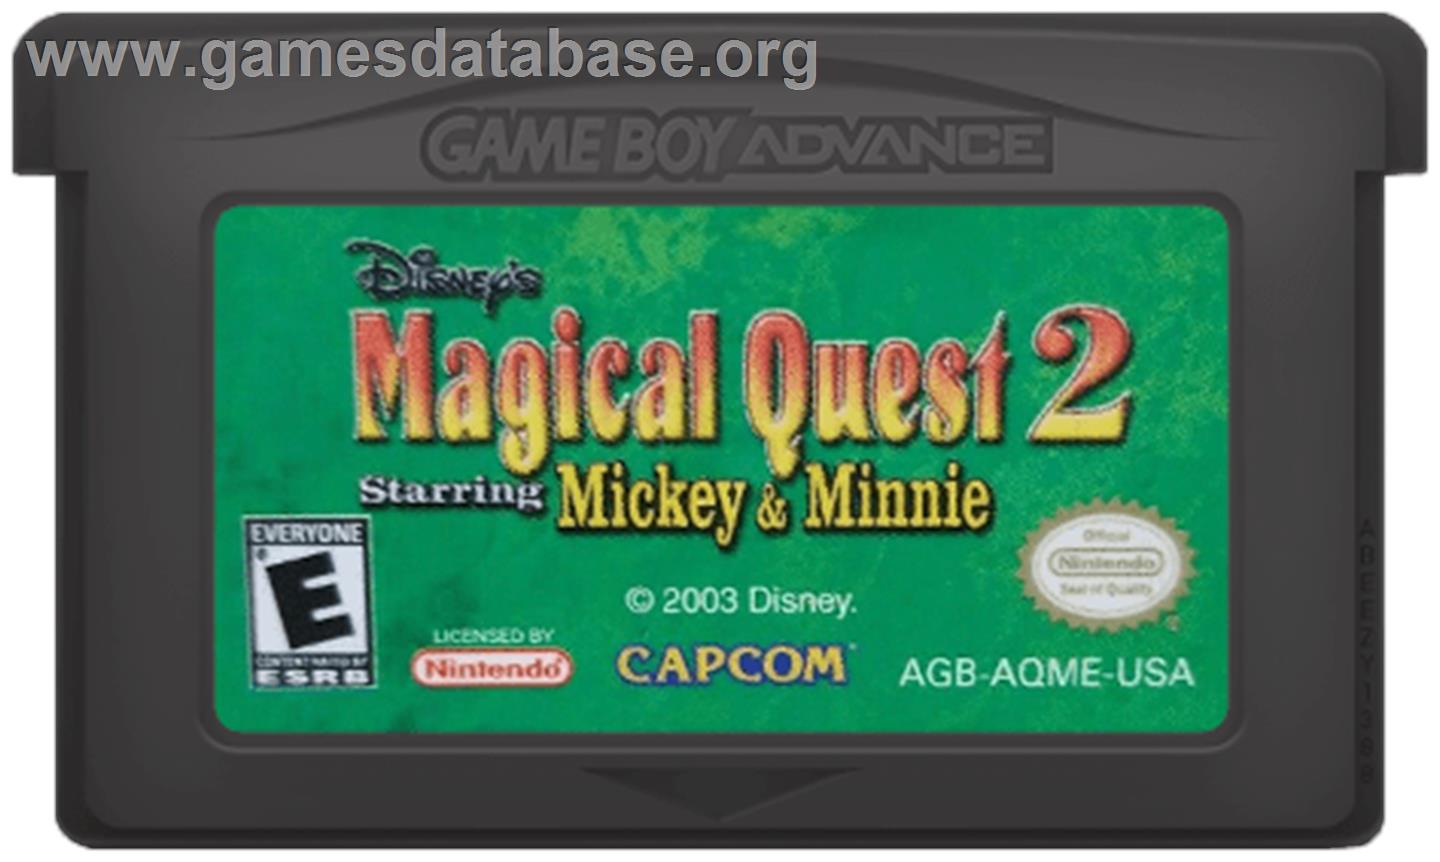 Great Circus Mystery starring Mickey and Minnie Mouse - Nintendo Game Boy Advance - Artwork - Cartridge